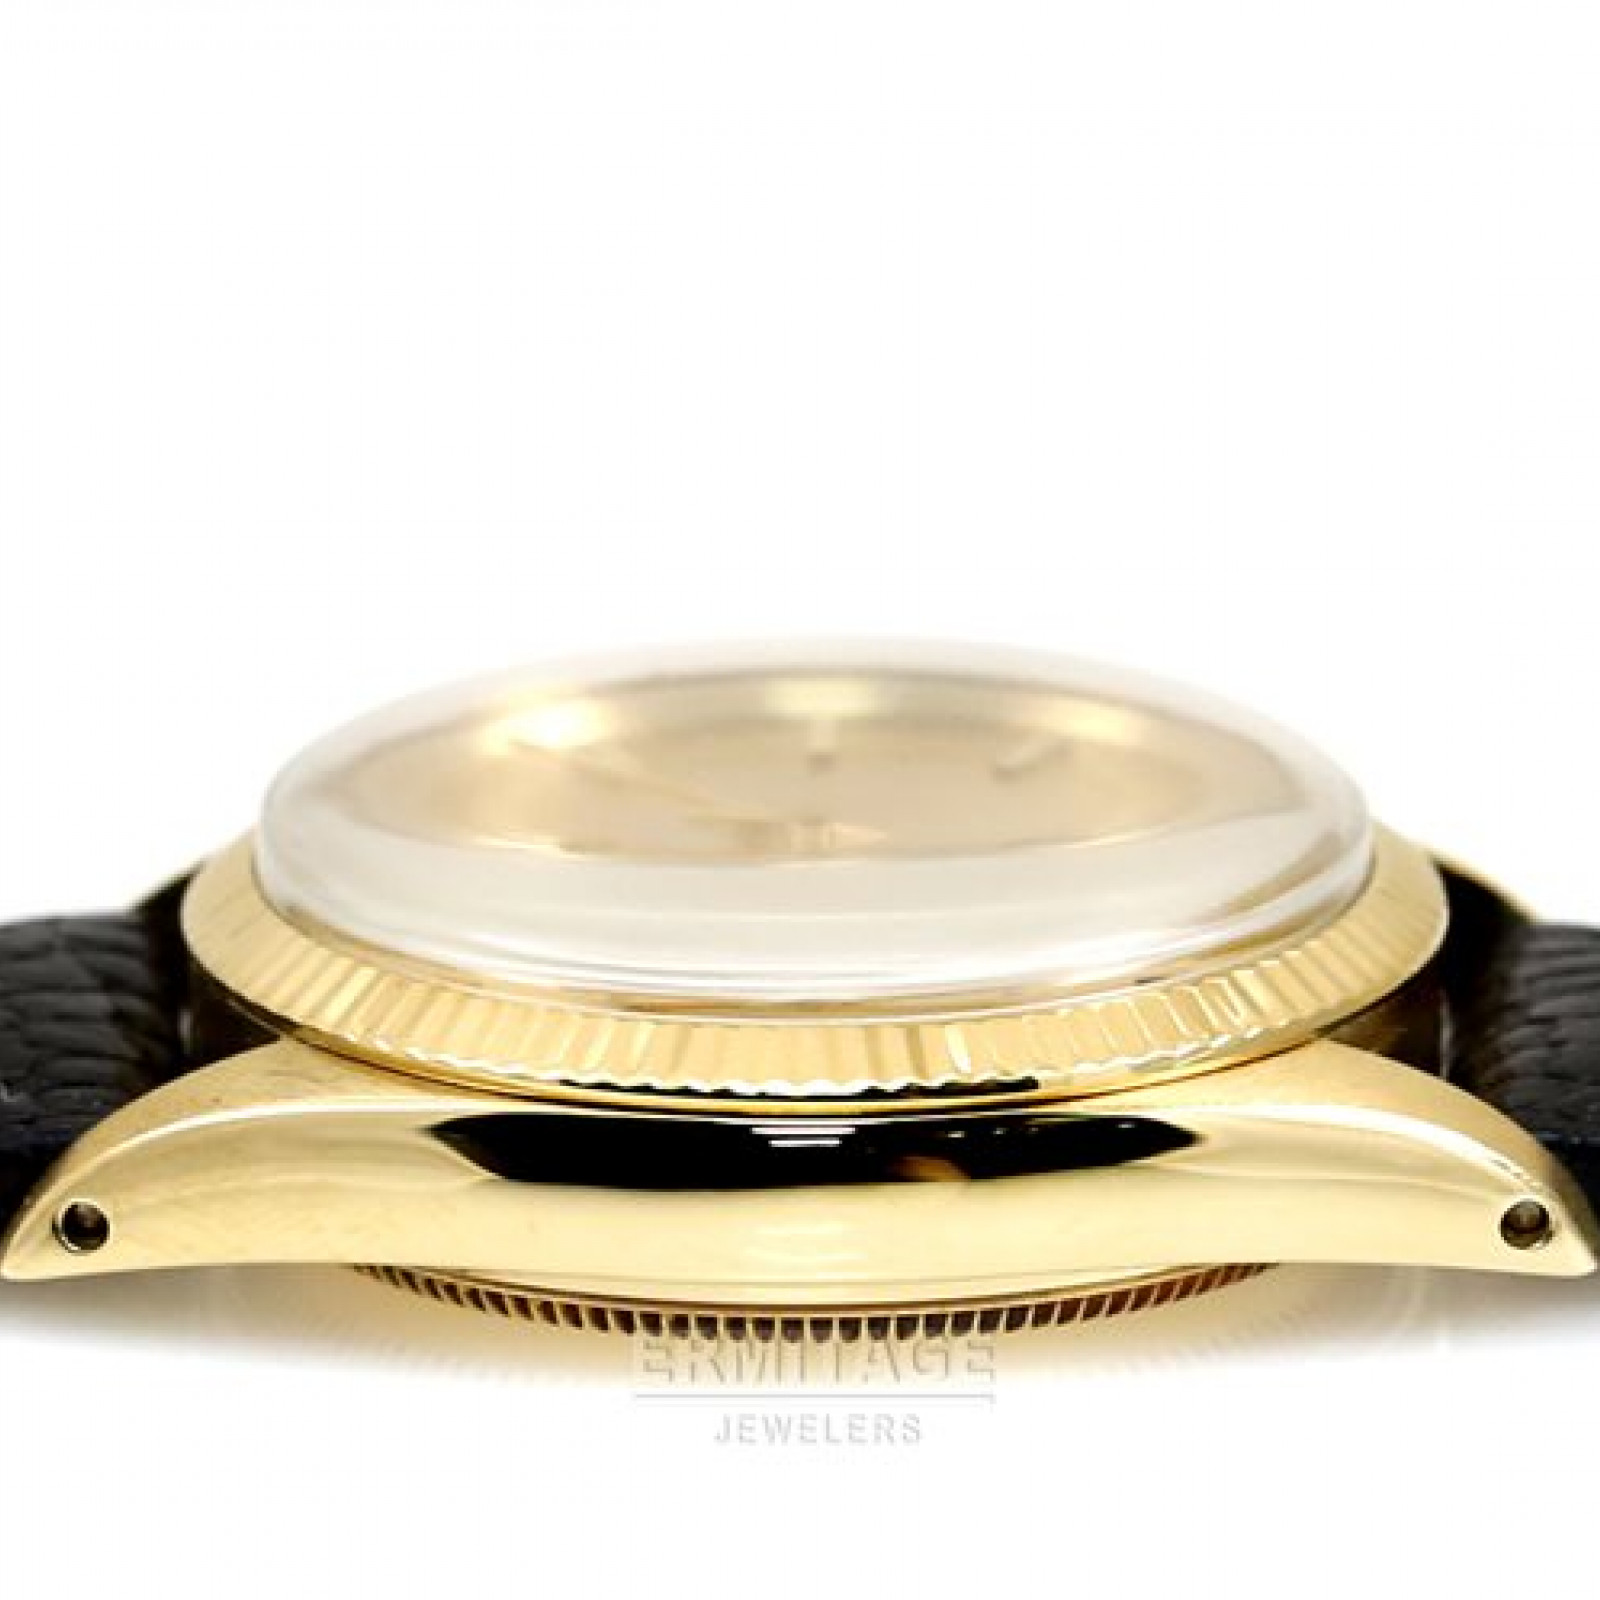 Vintage Rolex Oyster Perpetual 6551 Gold